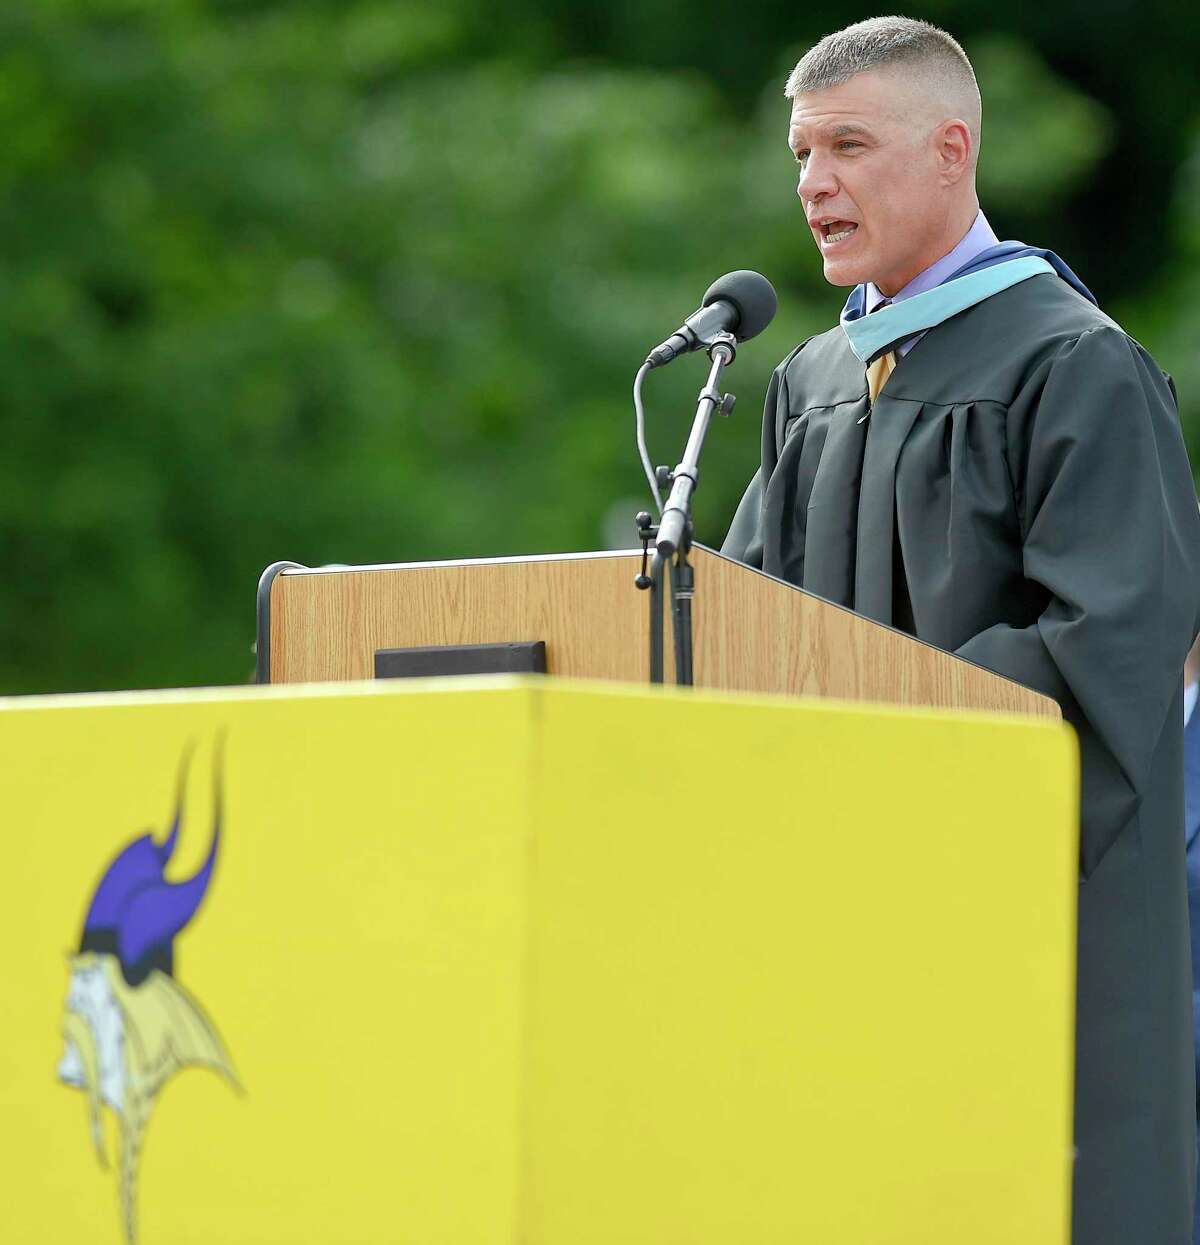 Principal Michael Rinaldi addresses the Westhill High School Class of 2019 at commencement exercises on June 17, 2019 in Stamford, Connecticut.